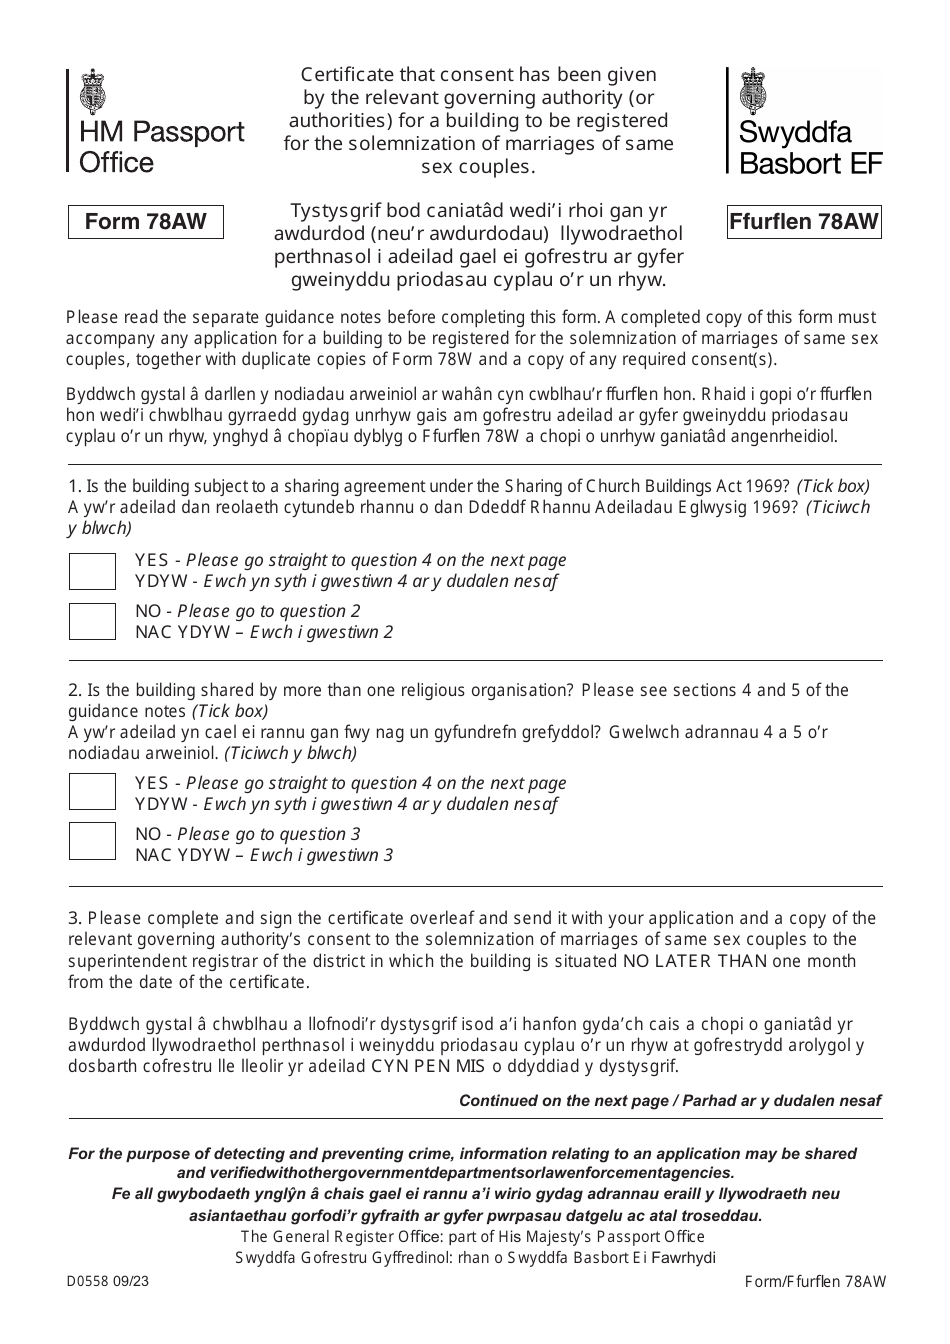 Form 78AW Certificate That Consent Has Been Given by the Relevant Governing Authority (Or Authorities) for a Building to Be Registered for the Solemnization of Marriages of Same Sex Couples - United Kingdom (English / Welsh), Page 1